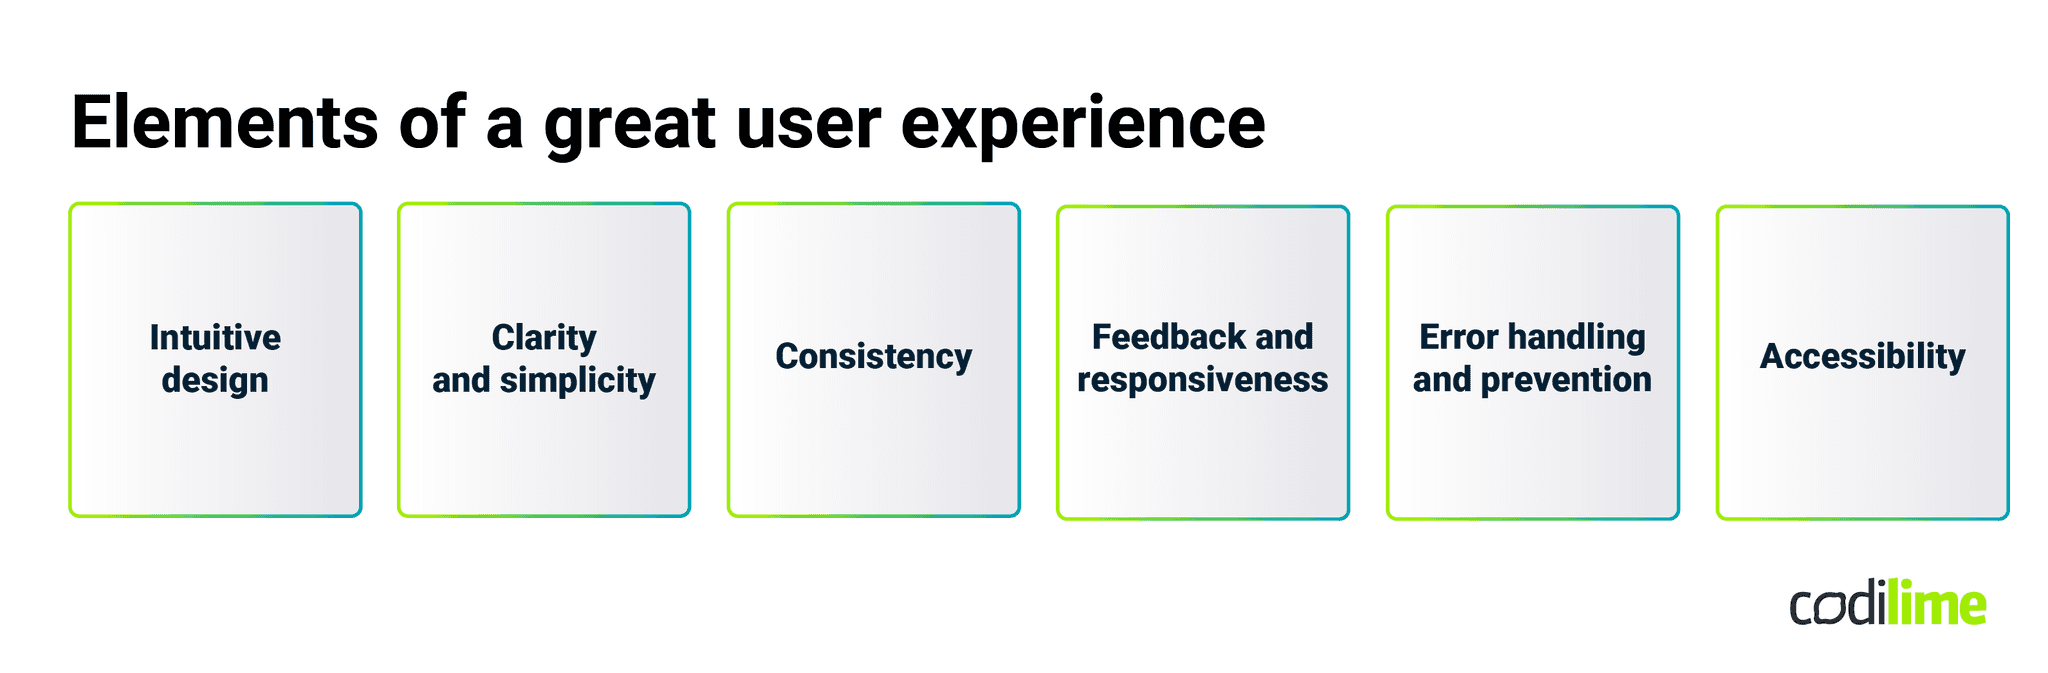 Elements of a great user experience